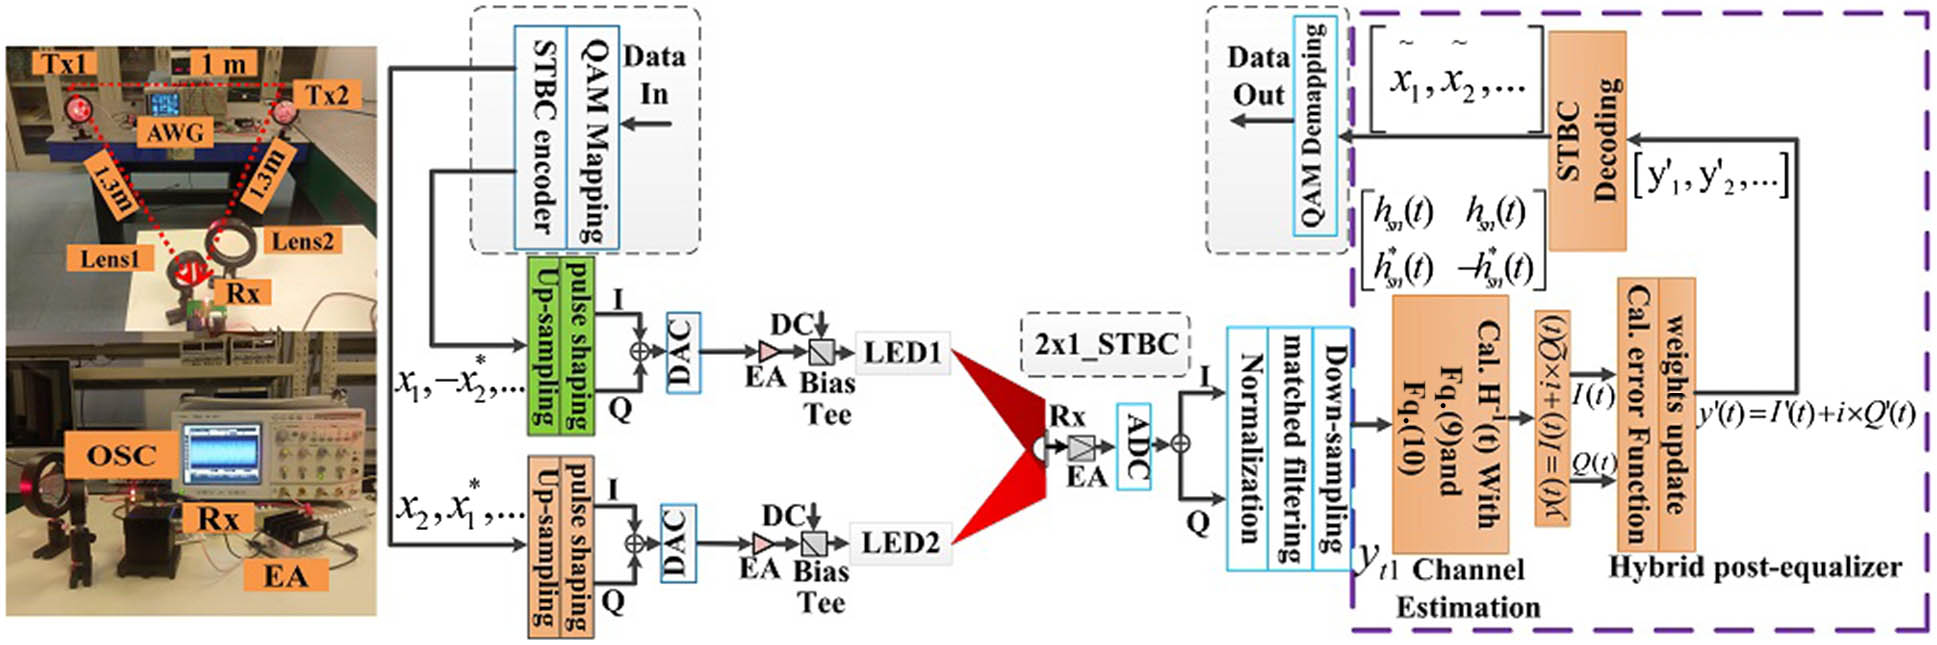 Block diagram and experimental setup in the MISO-STBC system.